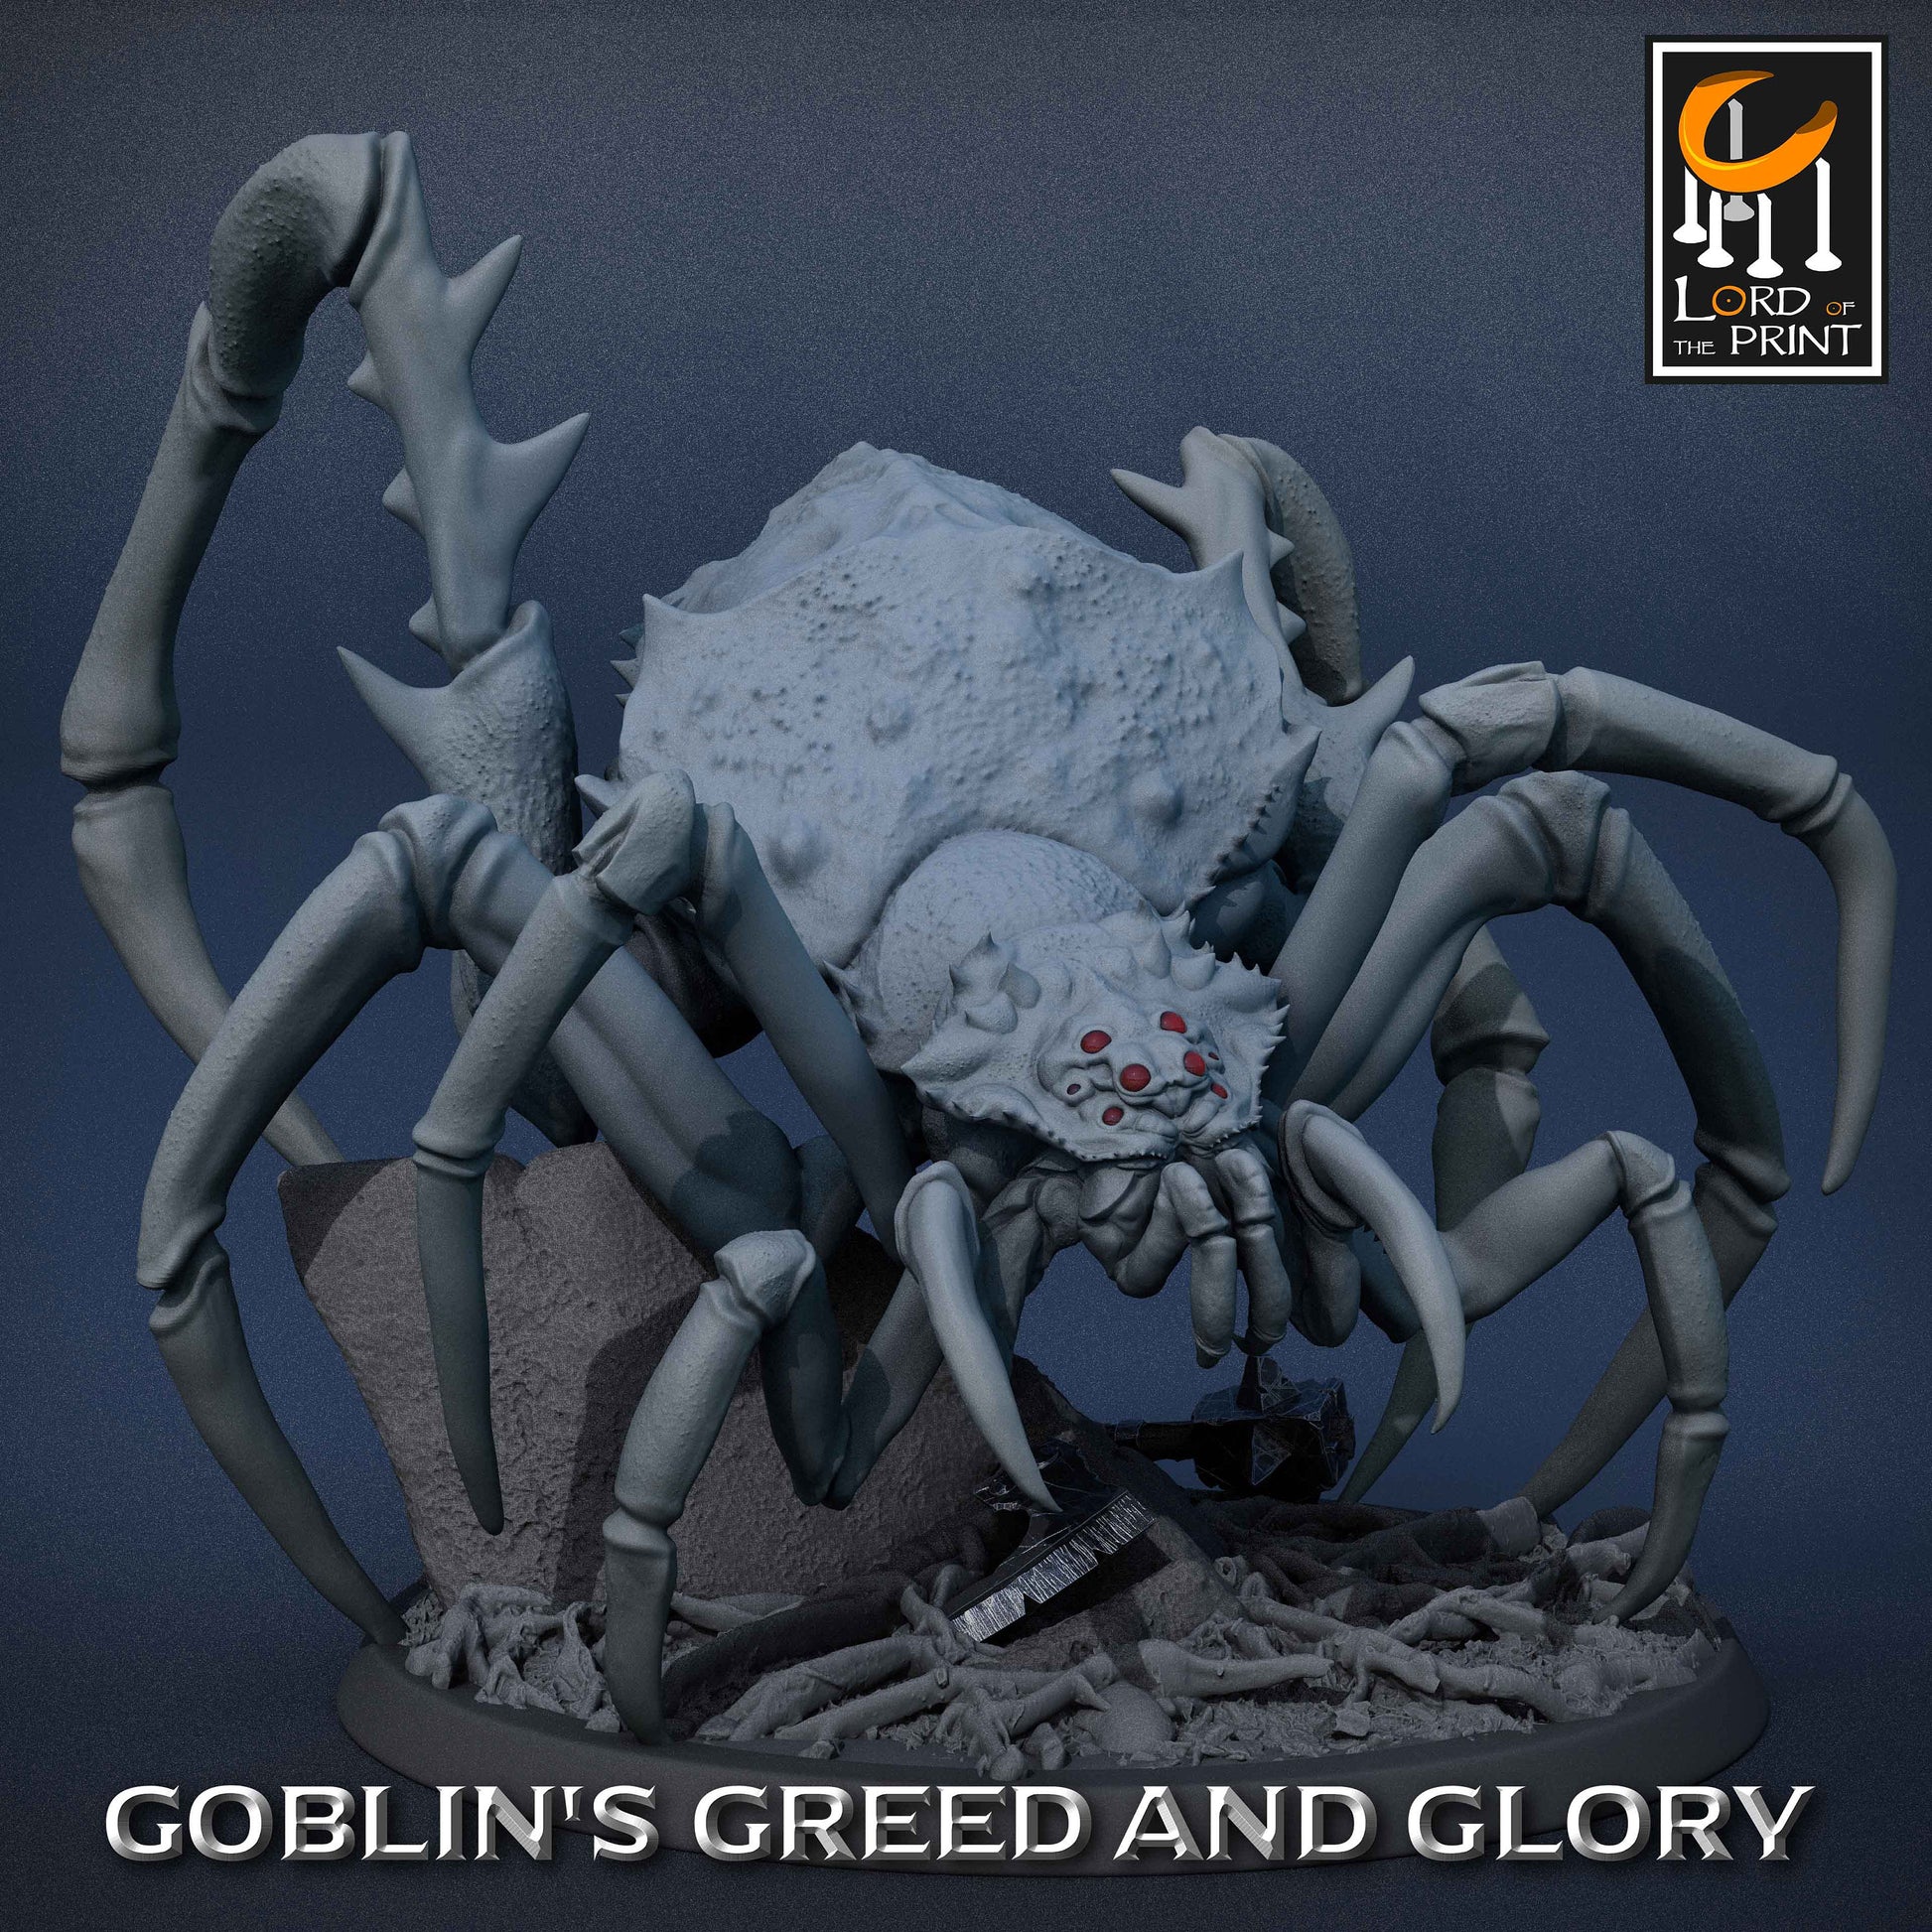 Goblin Spider Riders B | RPG Miniature for Dungeons and Dragons|Pathfinder|Tabletop Wargaming | Goblin Miniature | Lord of the Print